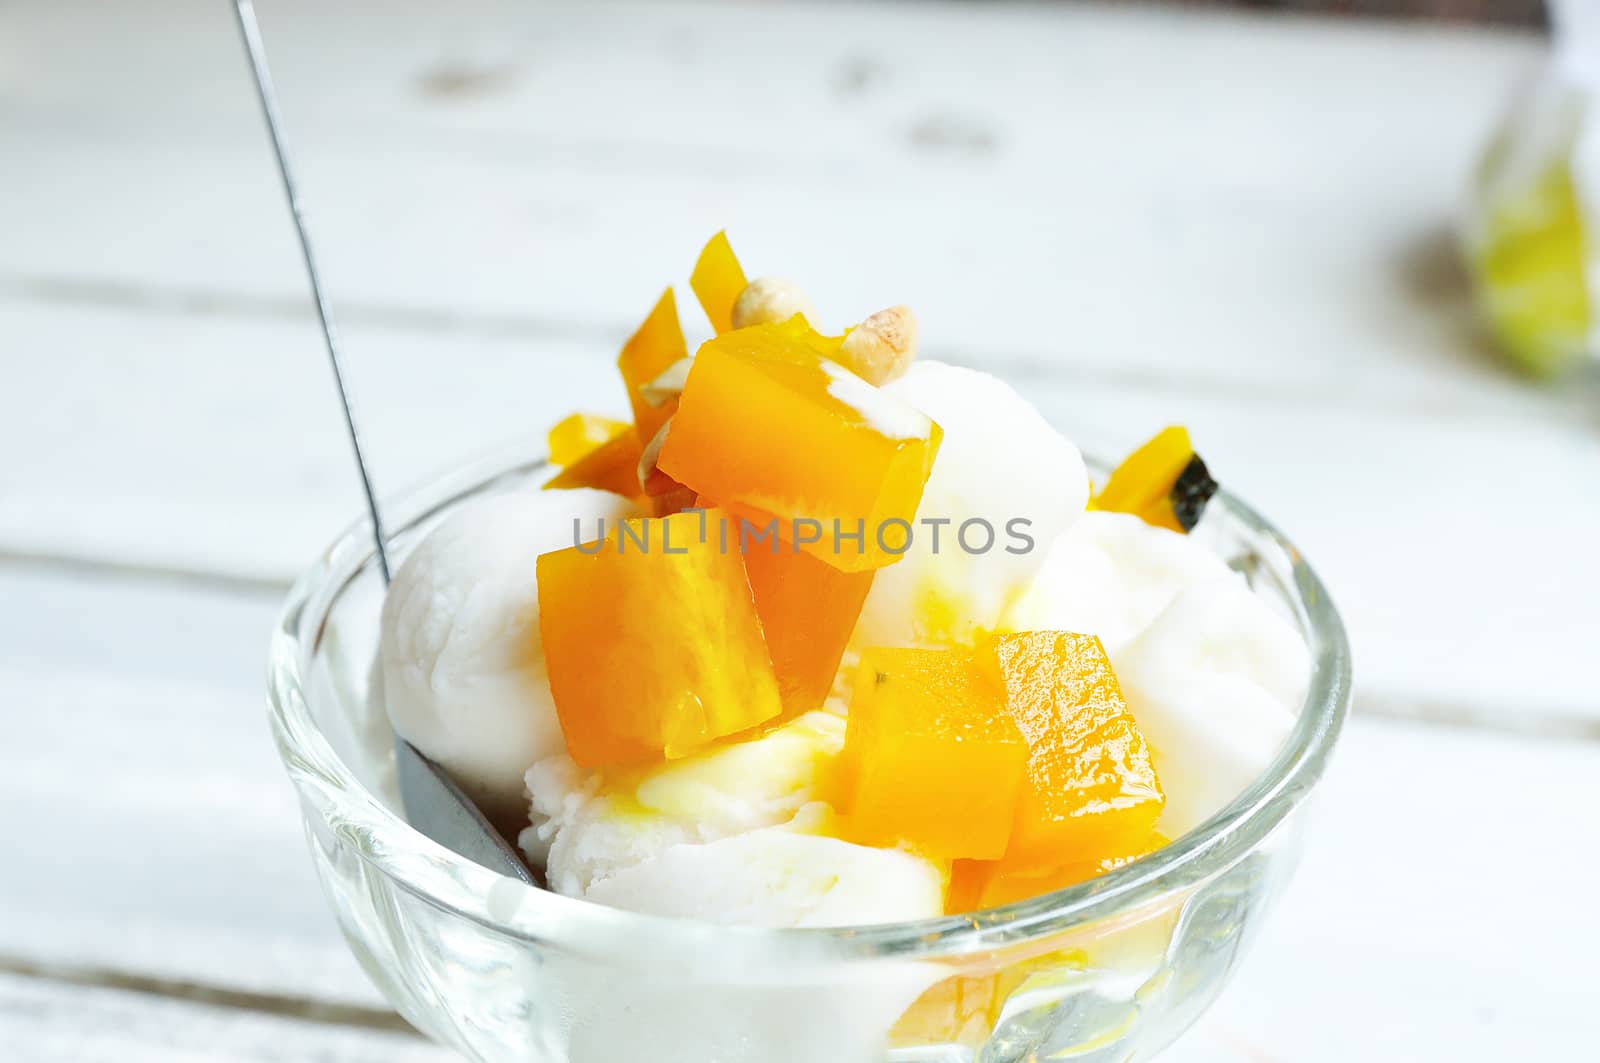 Coconut Ice cream by thampapon